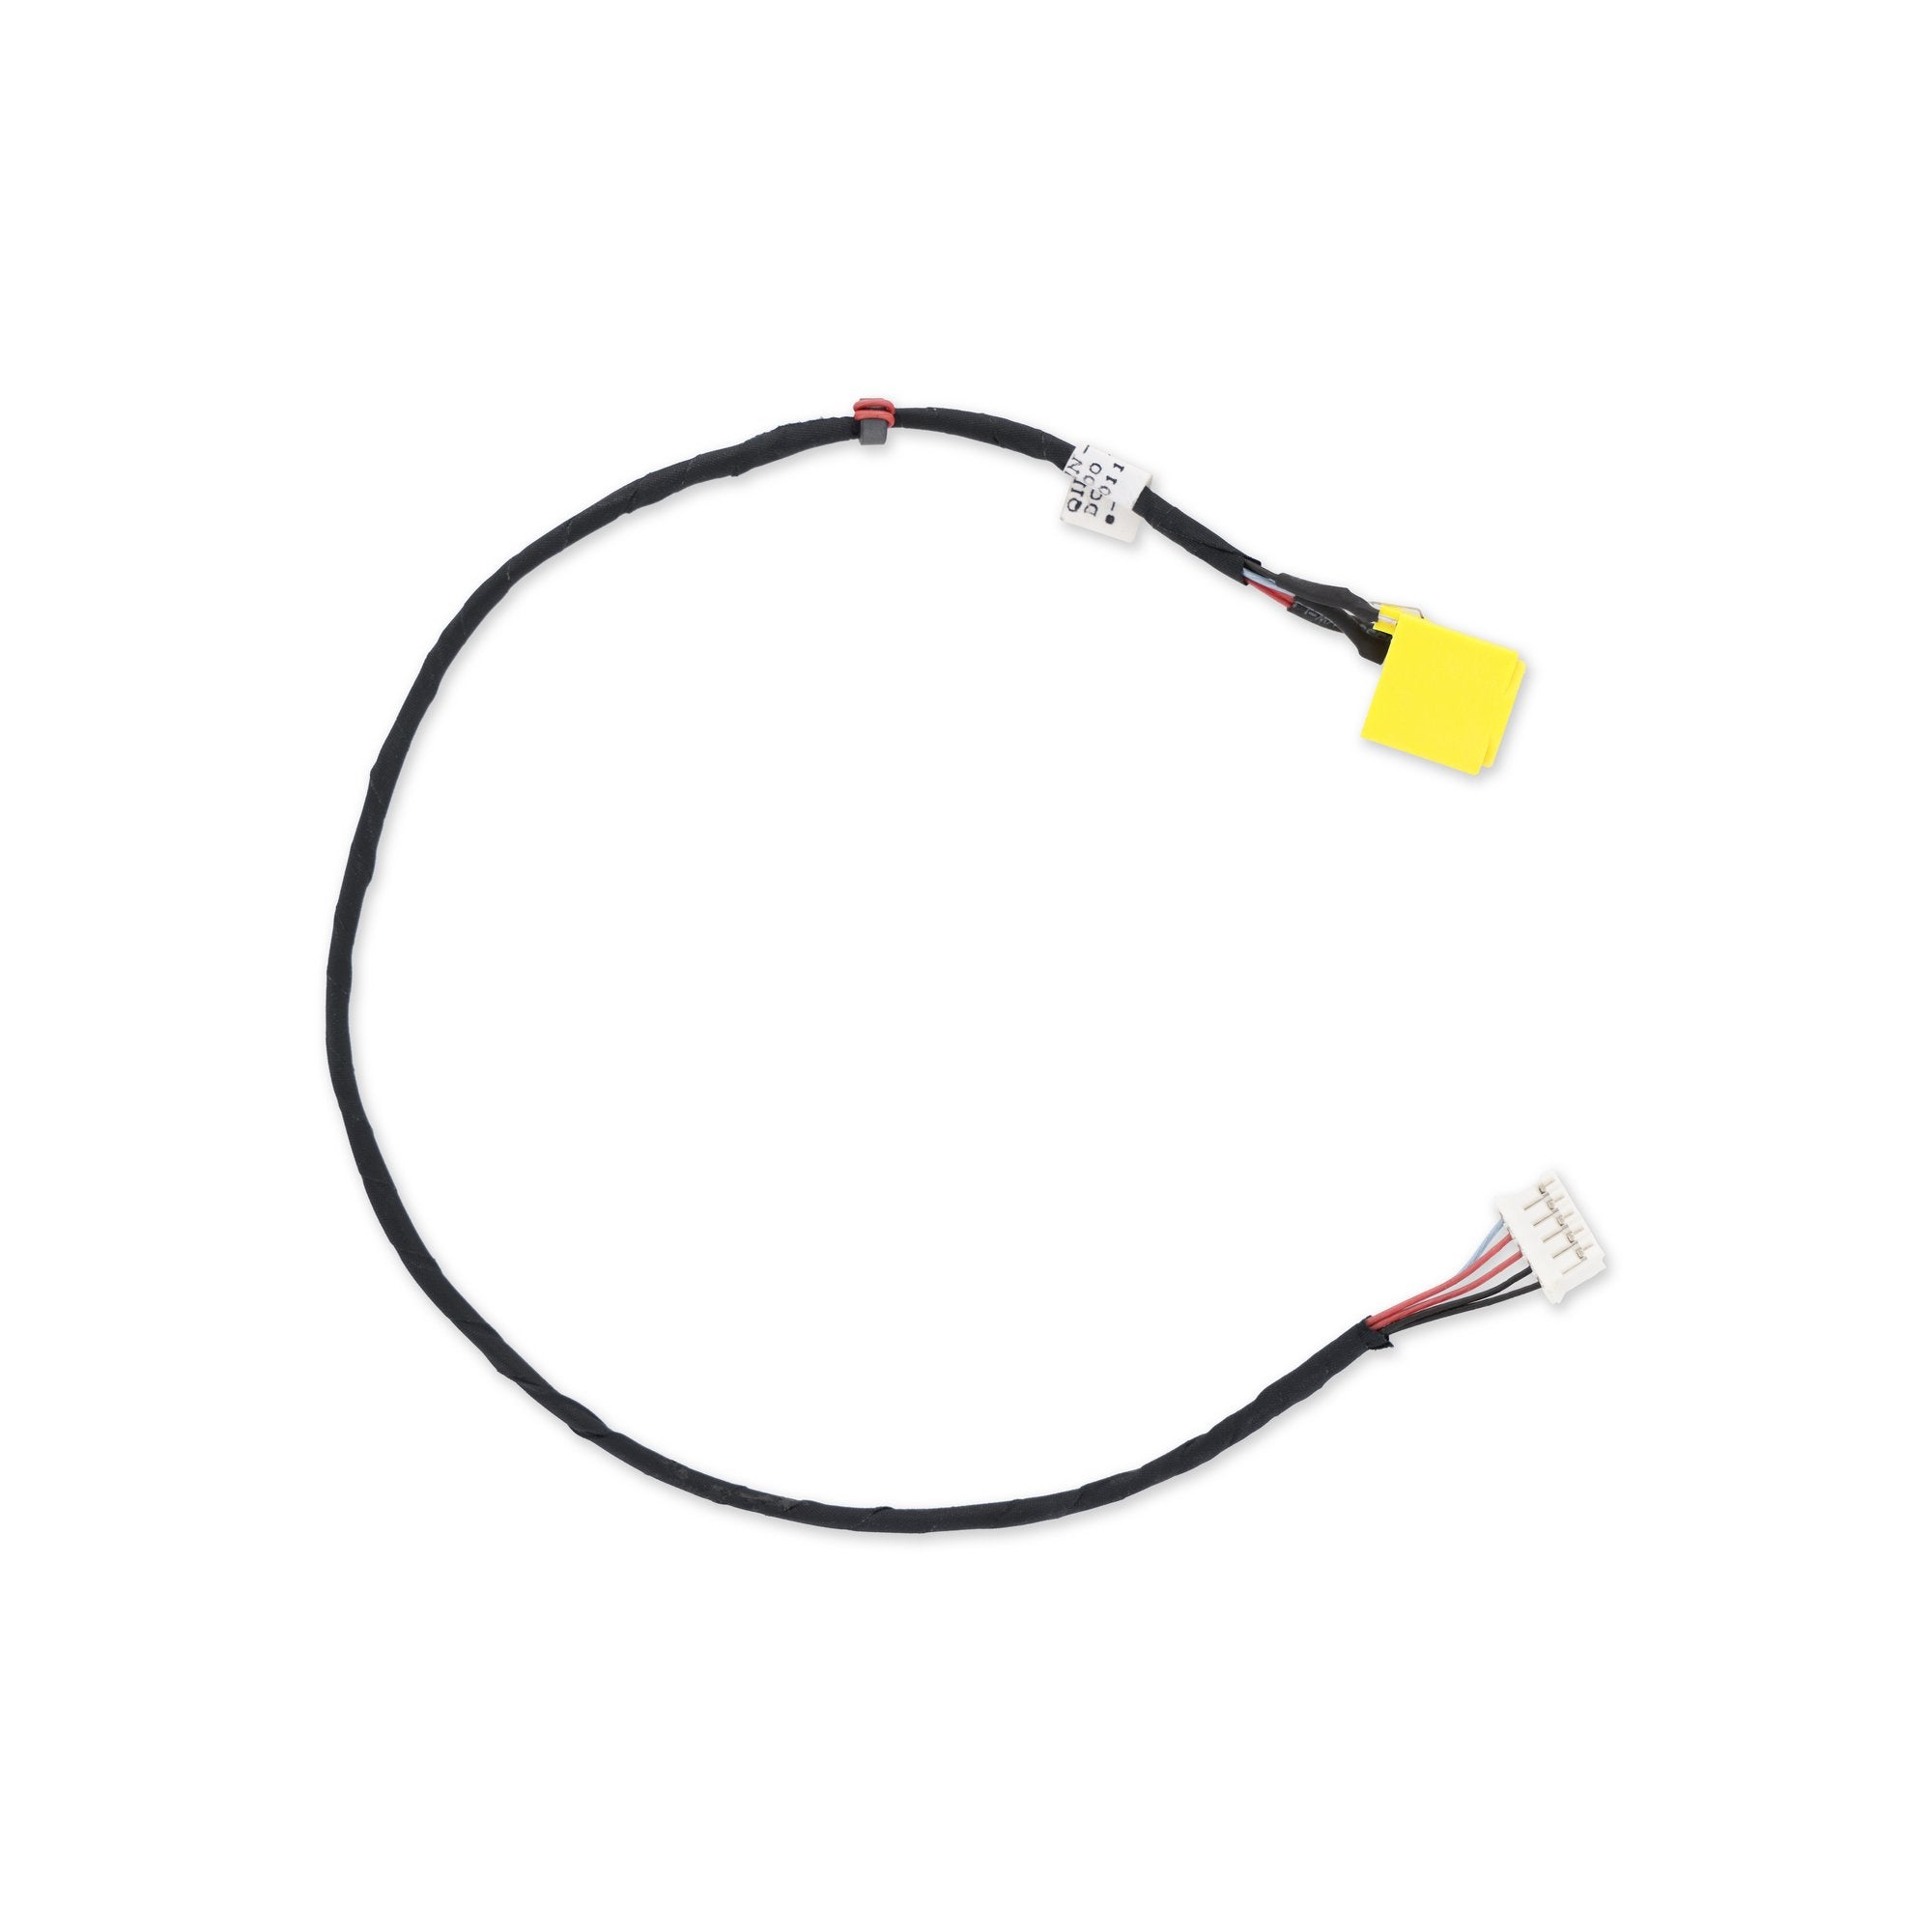 Lenovo DC-IN Cable - 04W1699 New